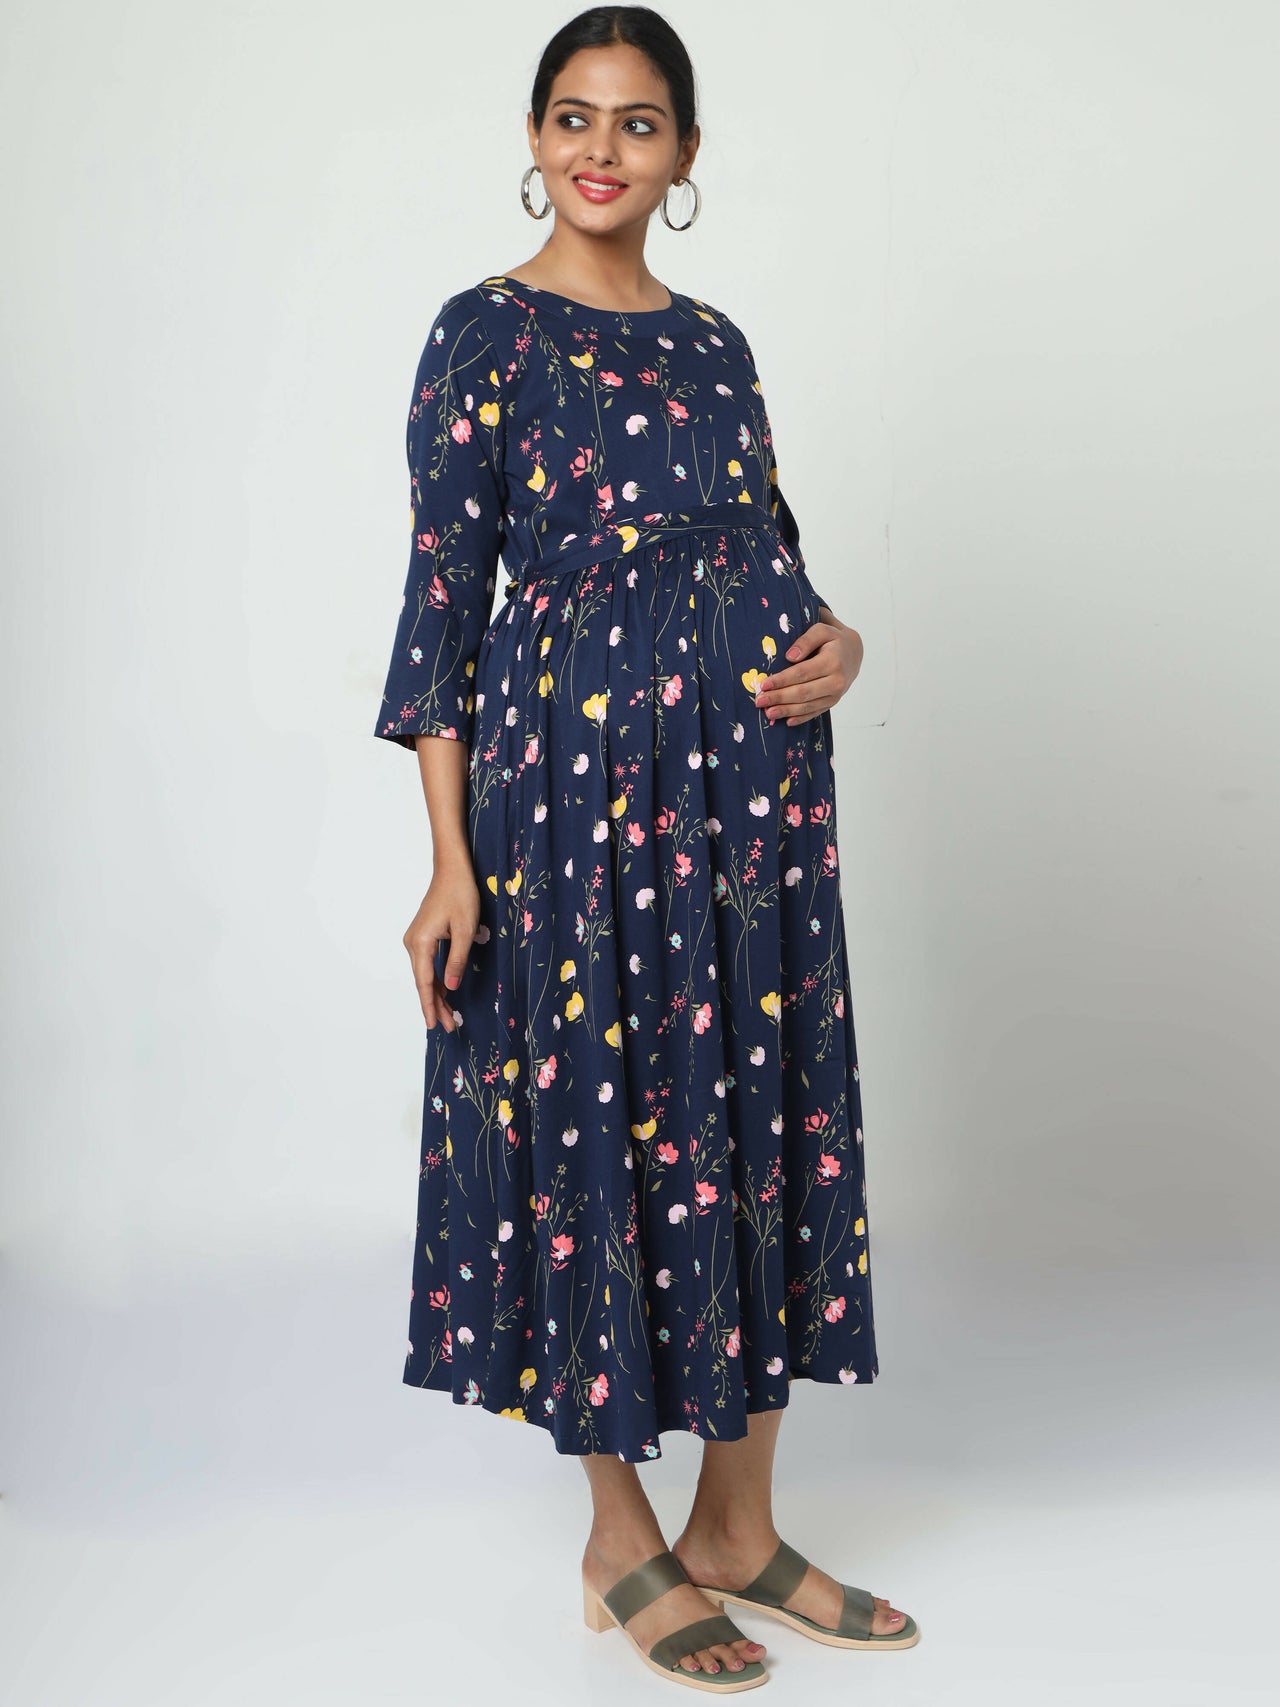 Manet Three Fourth Maternity Dress Floral Print With Concealed Zipper Nursing Access - Navy Blue - Distacart